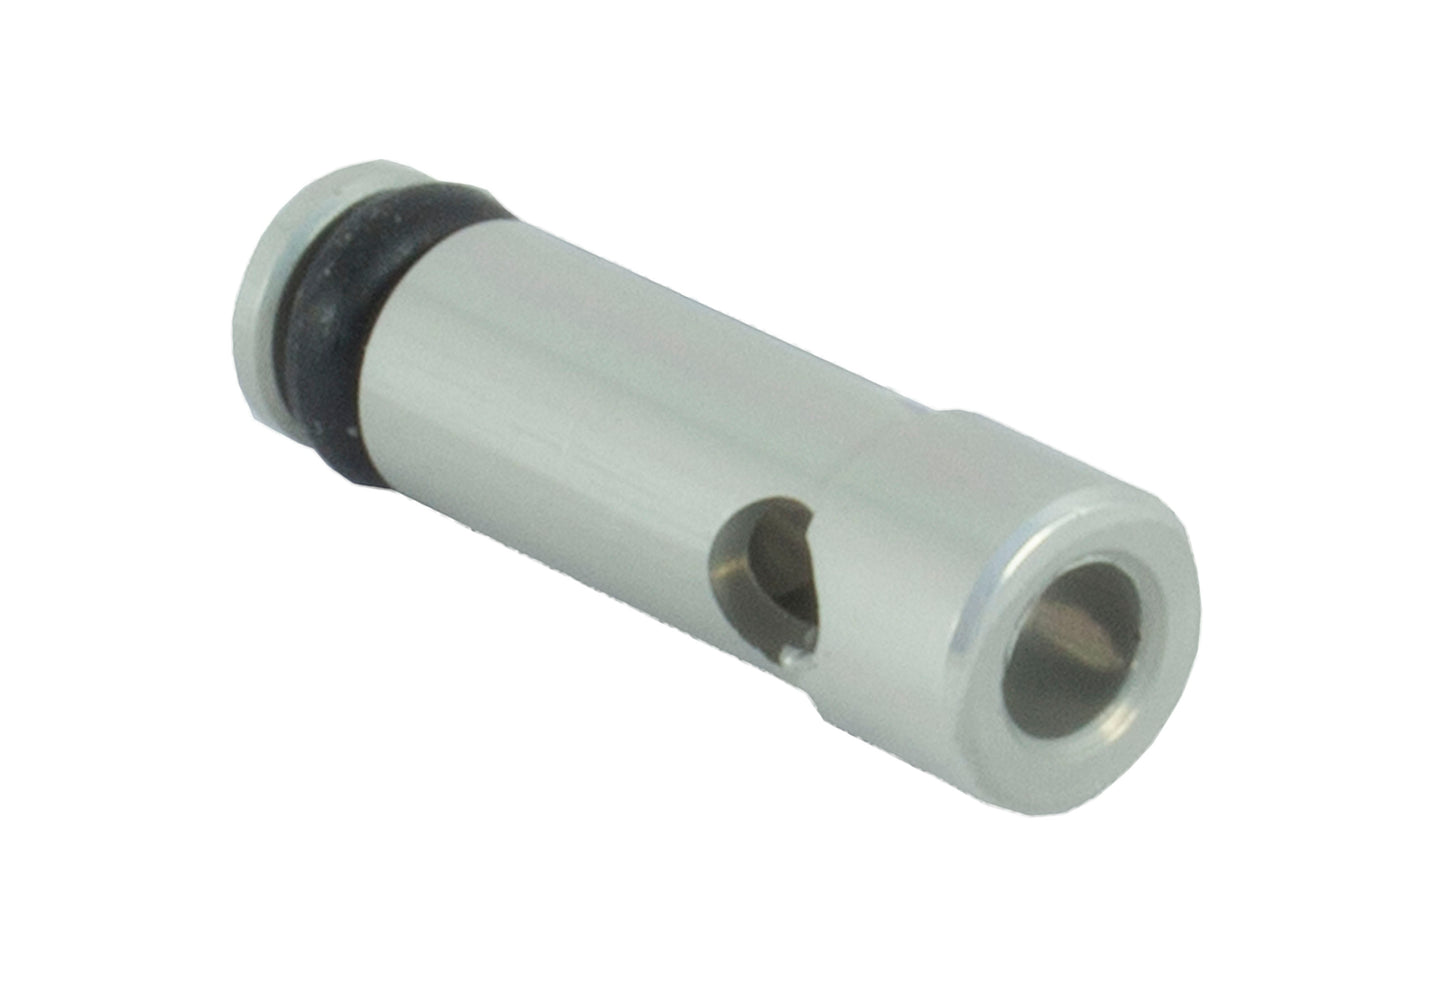 Eclipse Etha Spring-less Plunger assembly